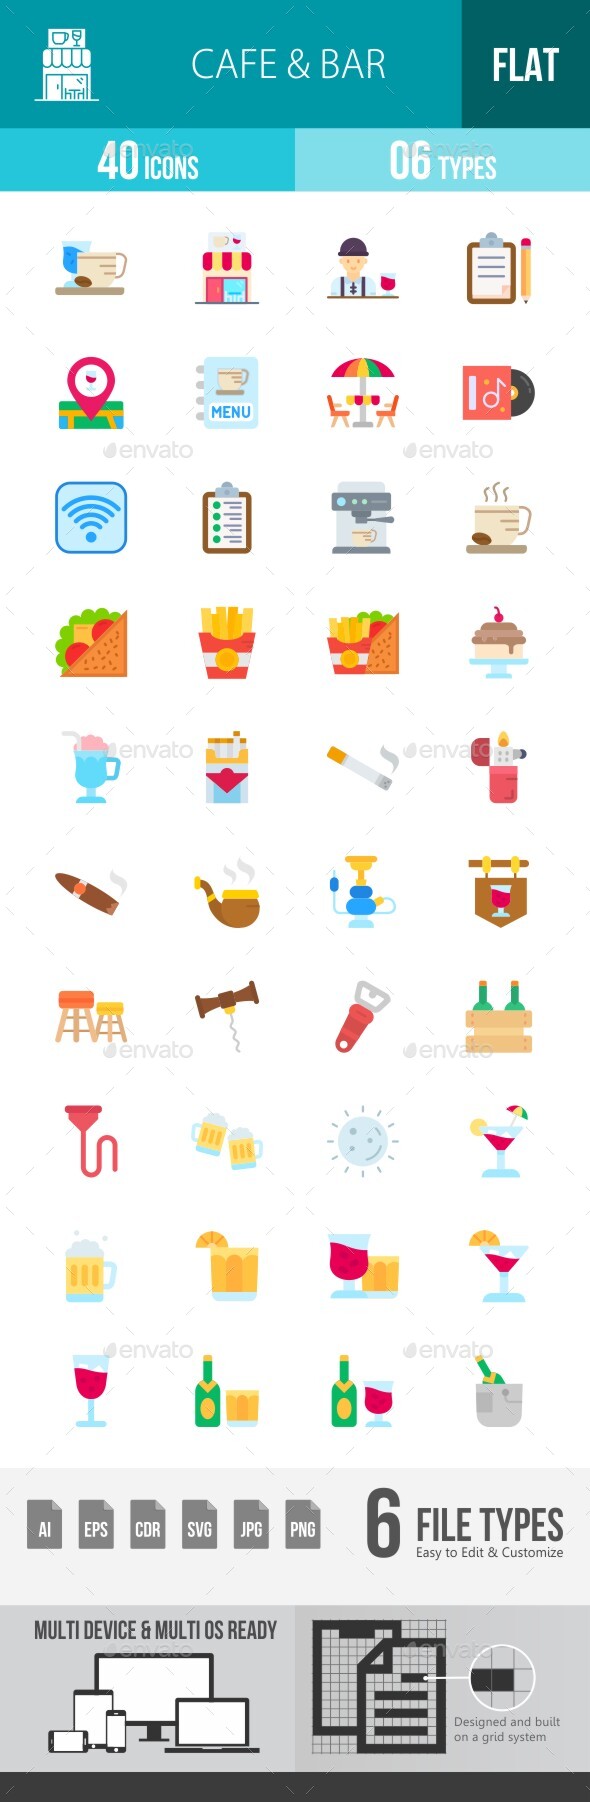 [DOWNLOAD]Cafe & Bar Flat Multicolor Icons